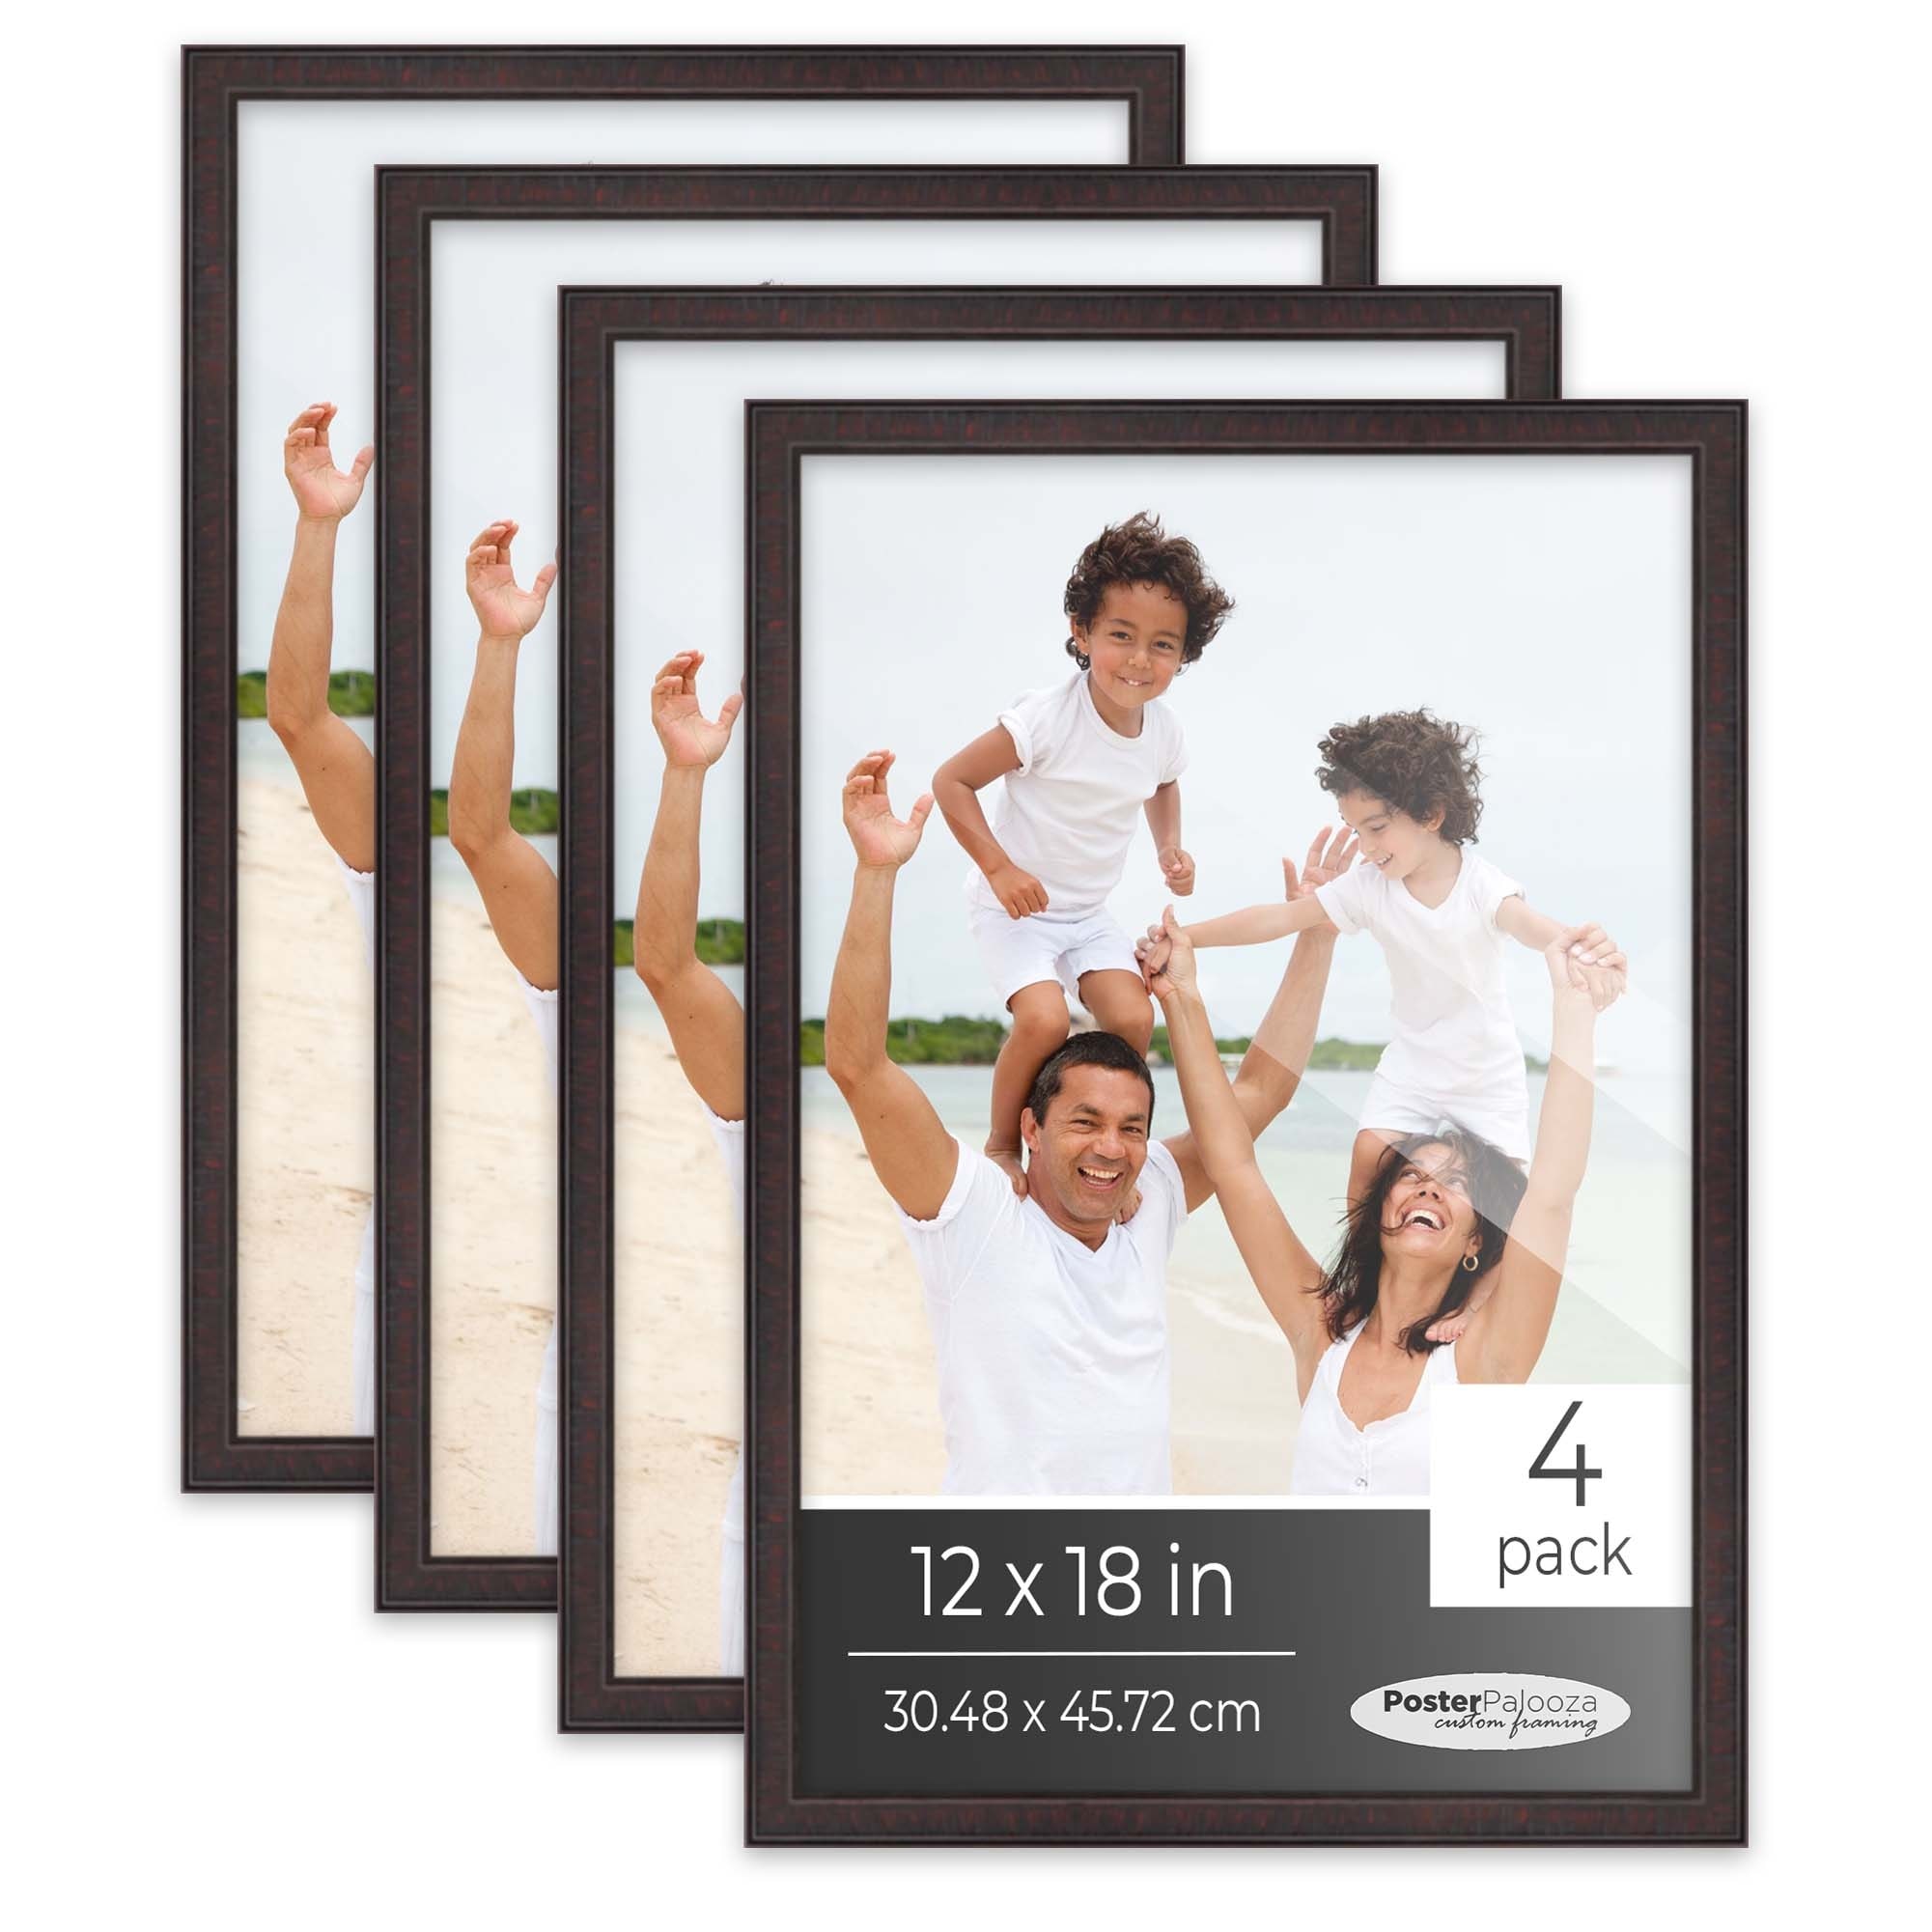 https://ak1.ostkcdn.com/images/products/is/images/direct/cfb58a42e5ced0de8be3f1d55f2f39fa2a36e93f/16x20-Rustic-Brown-Picture-Frame-Set-Pack-of-4-16x20-Wood-Picture-Frames-for-Gallery-Wall-4-16x20-Rustic-Brown-Frames.jpg